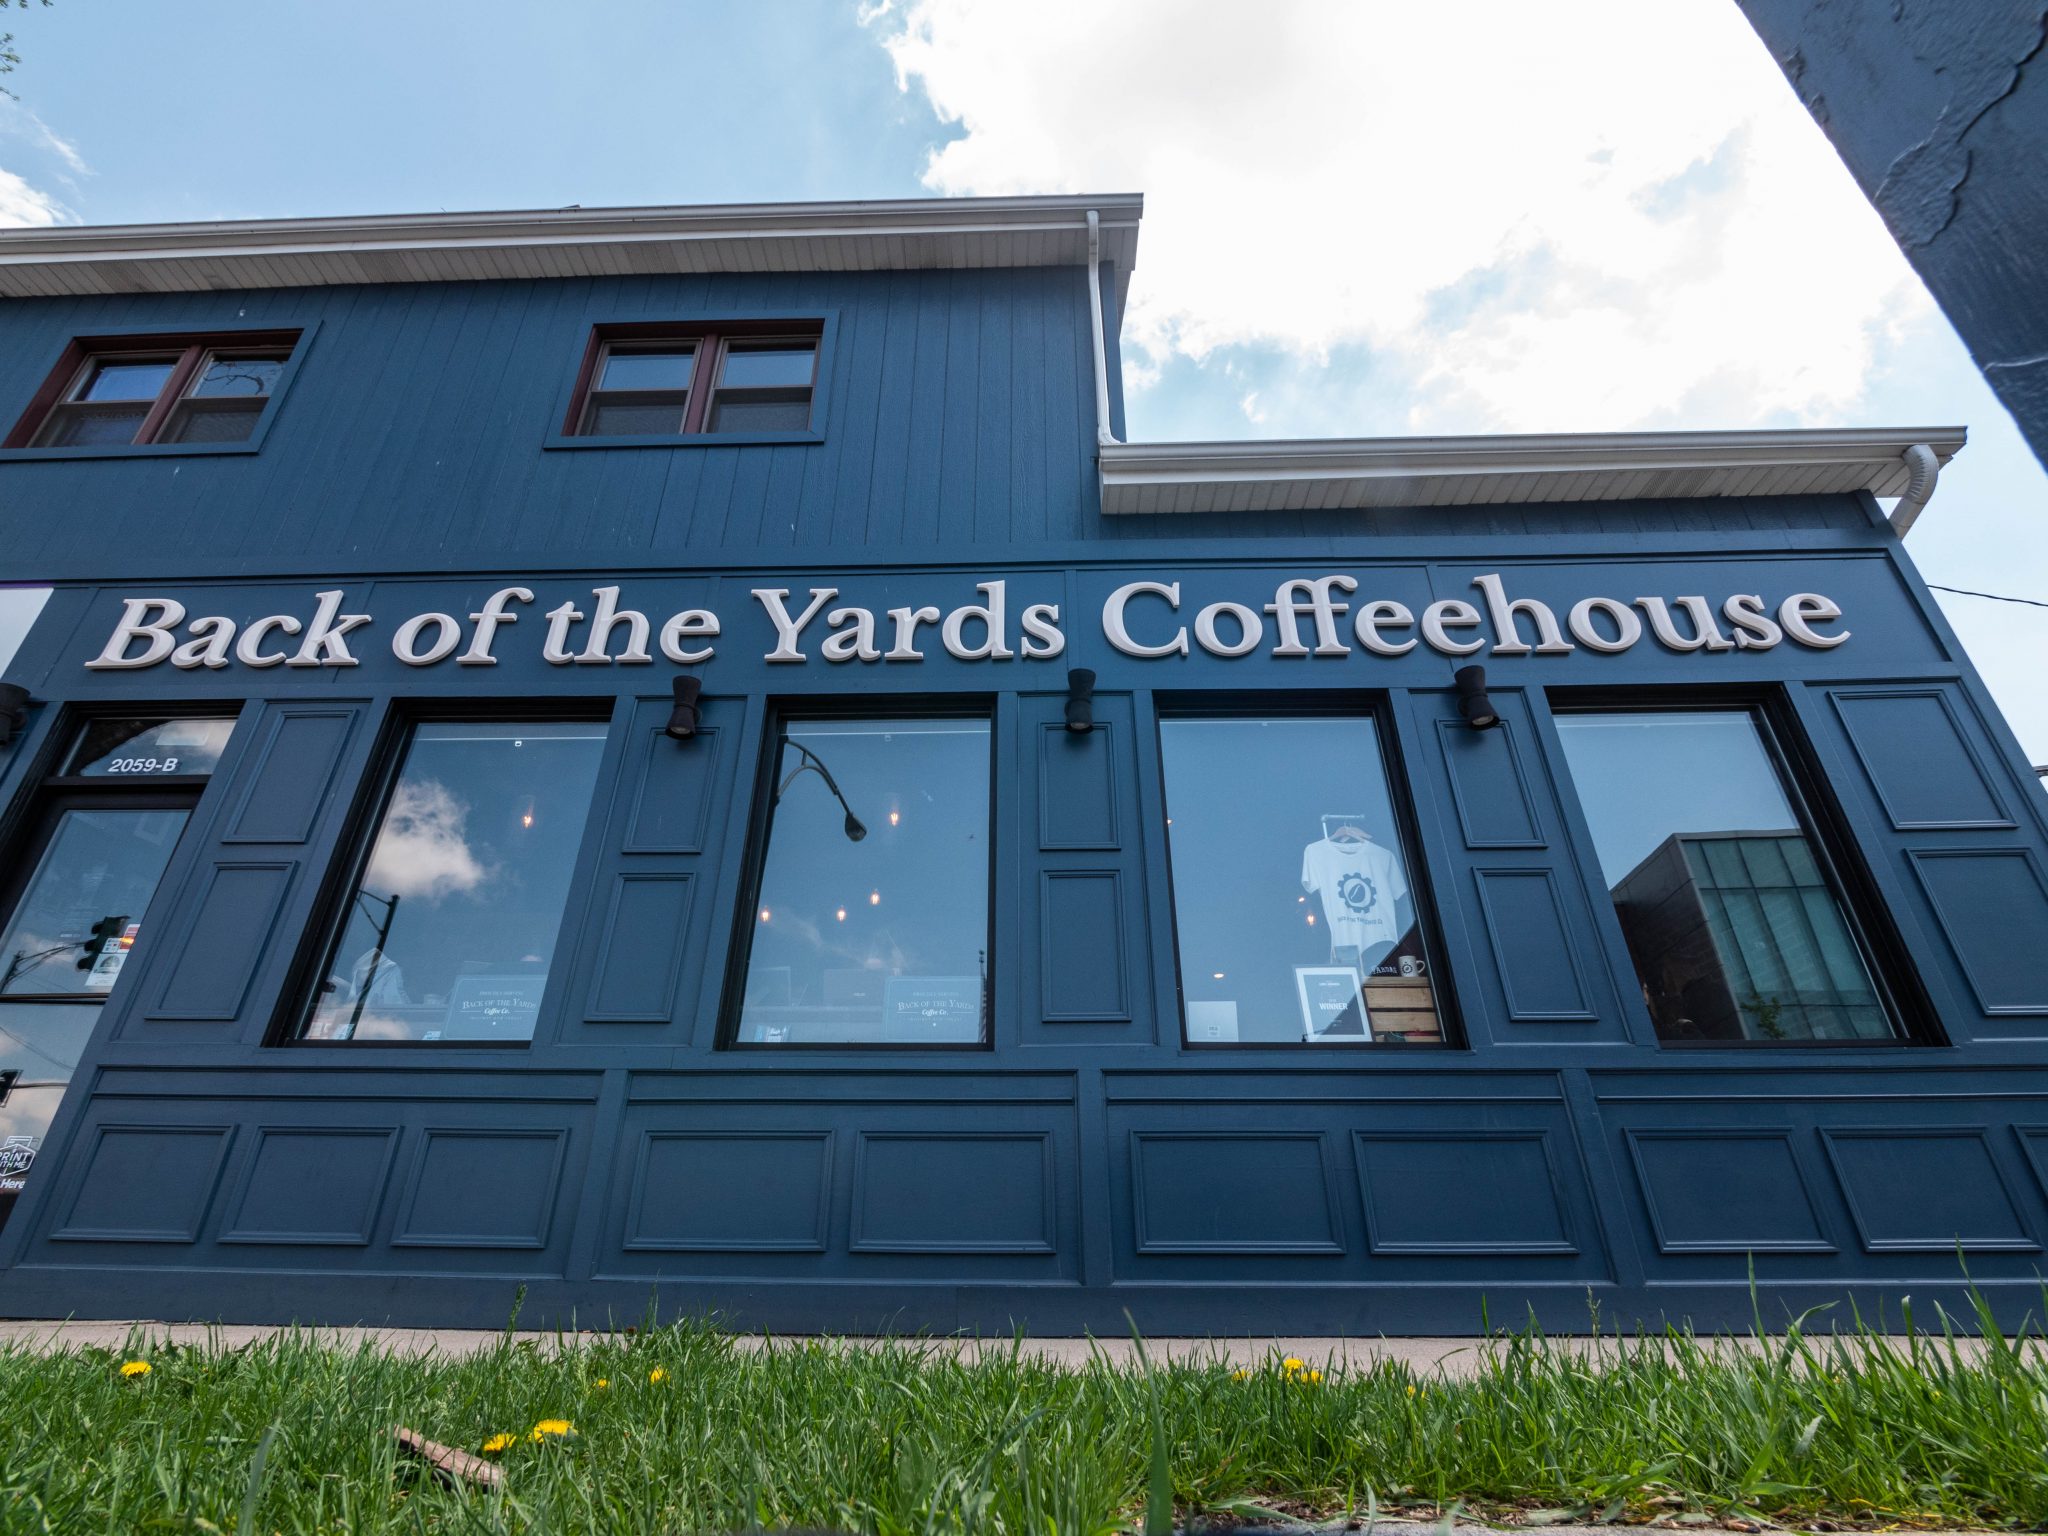 Back of the Yards Coffeehouse building